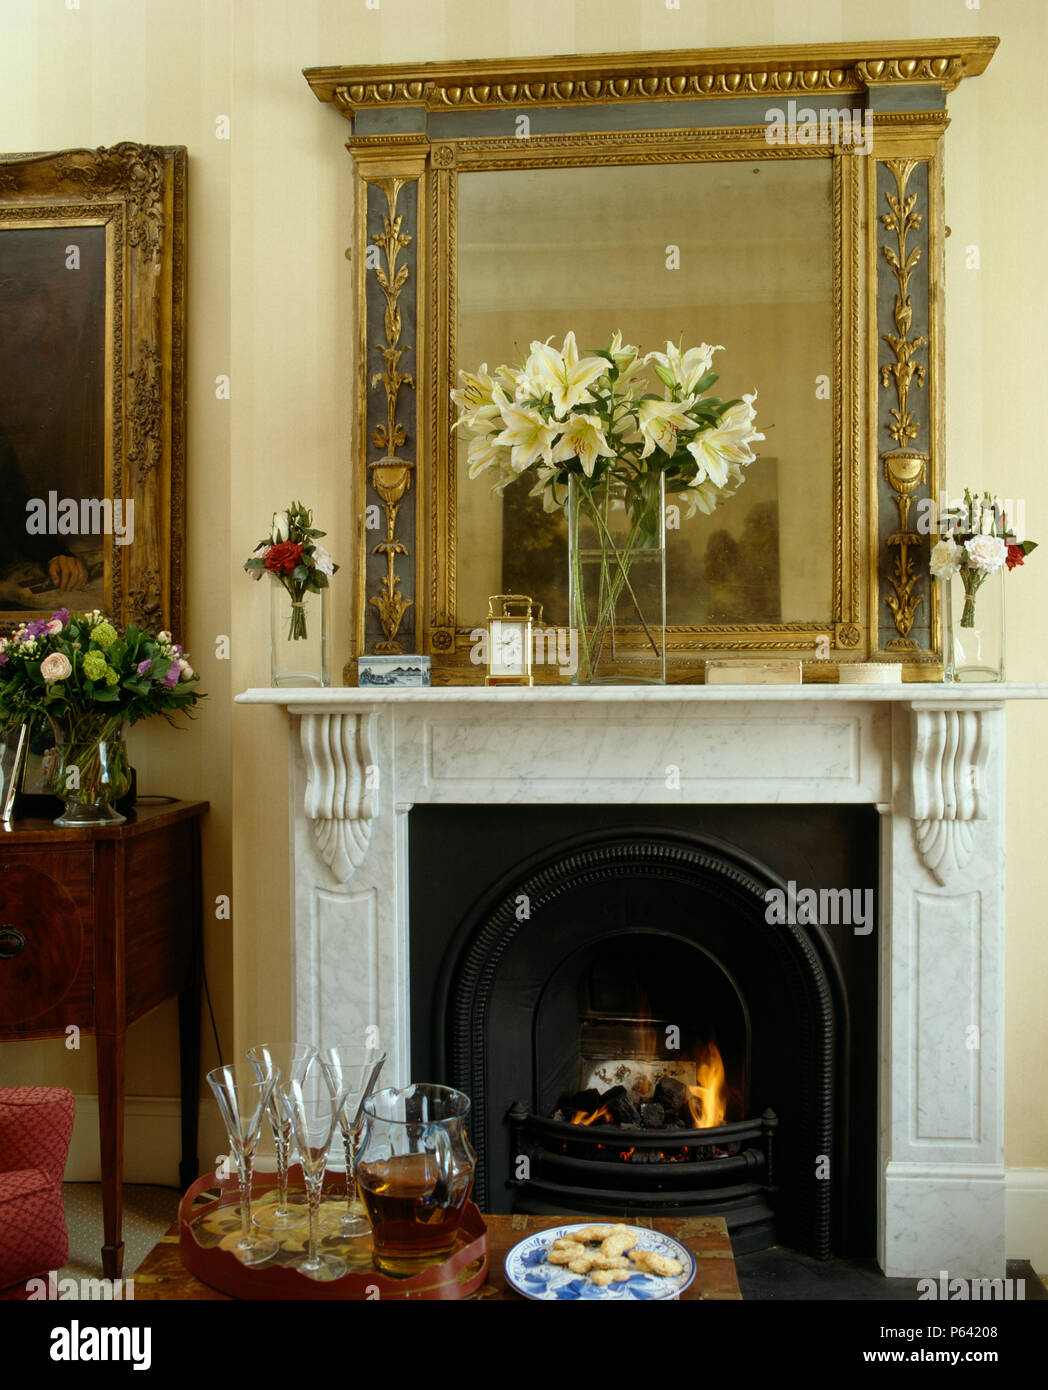 Antique mirror above marnble fireplace and lighted fire in traditional sitting room Stock Photo